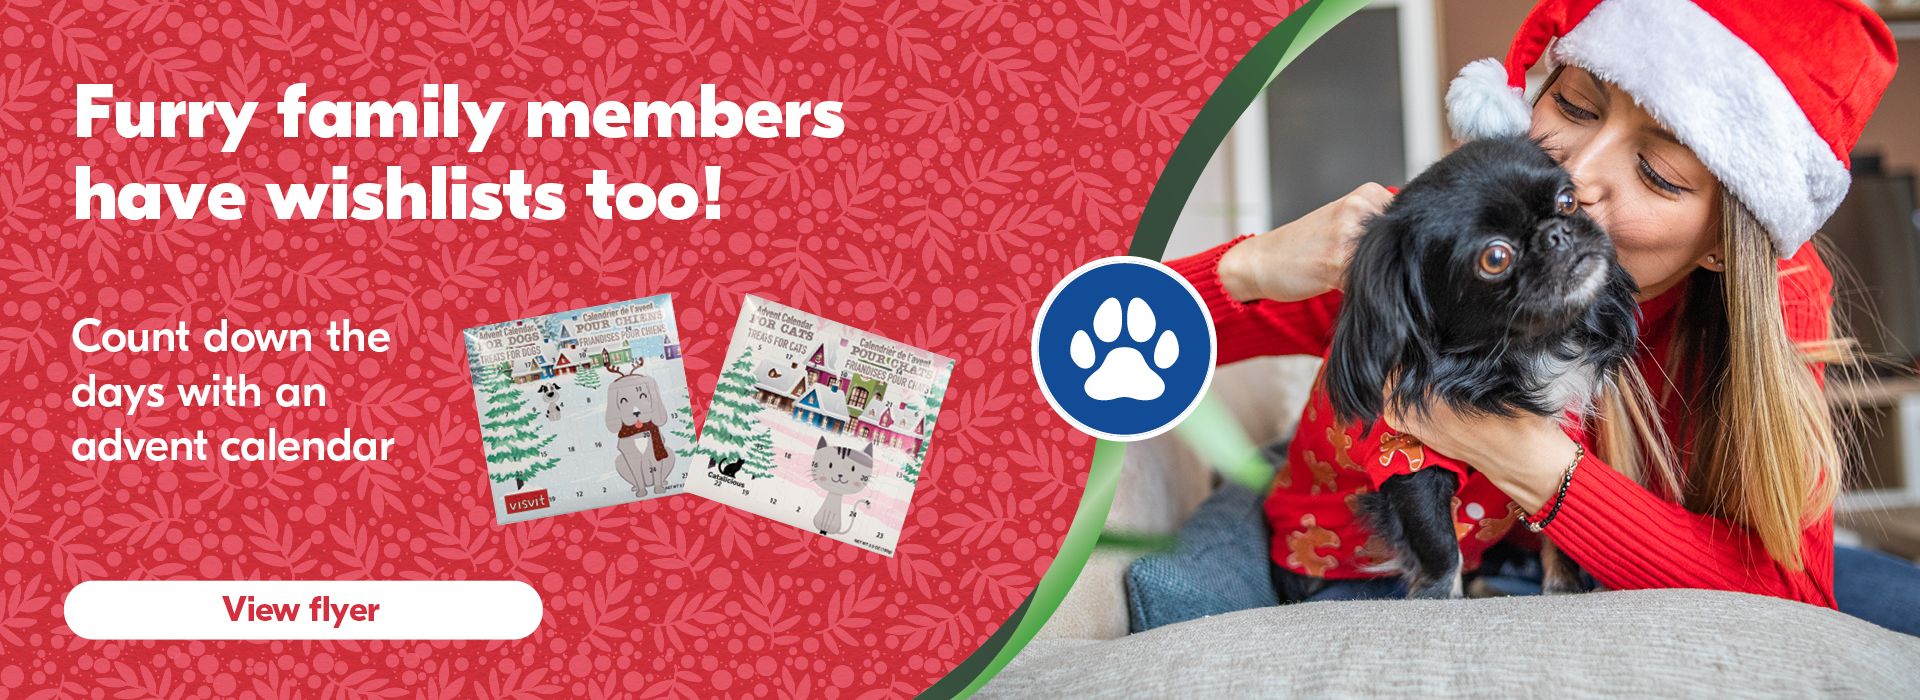 Text Reading 'Furry family members have wishlists too! Count down the days with an advent calendar. Click on the button below to 'View flyer'.